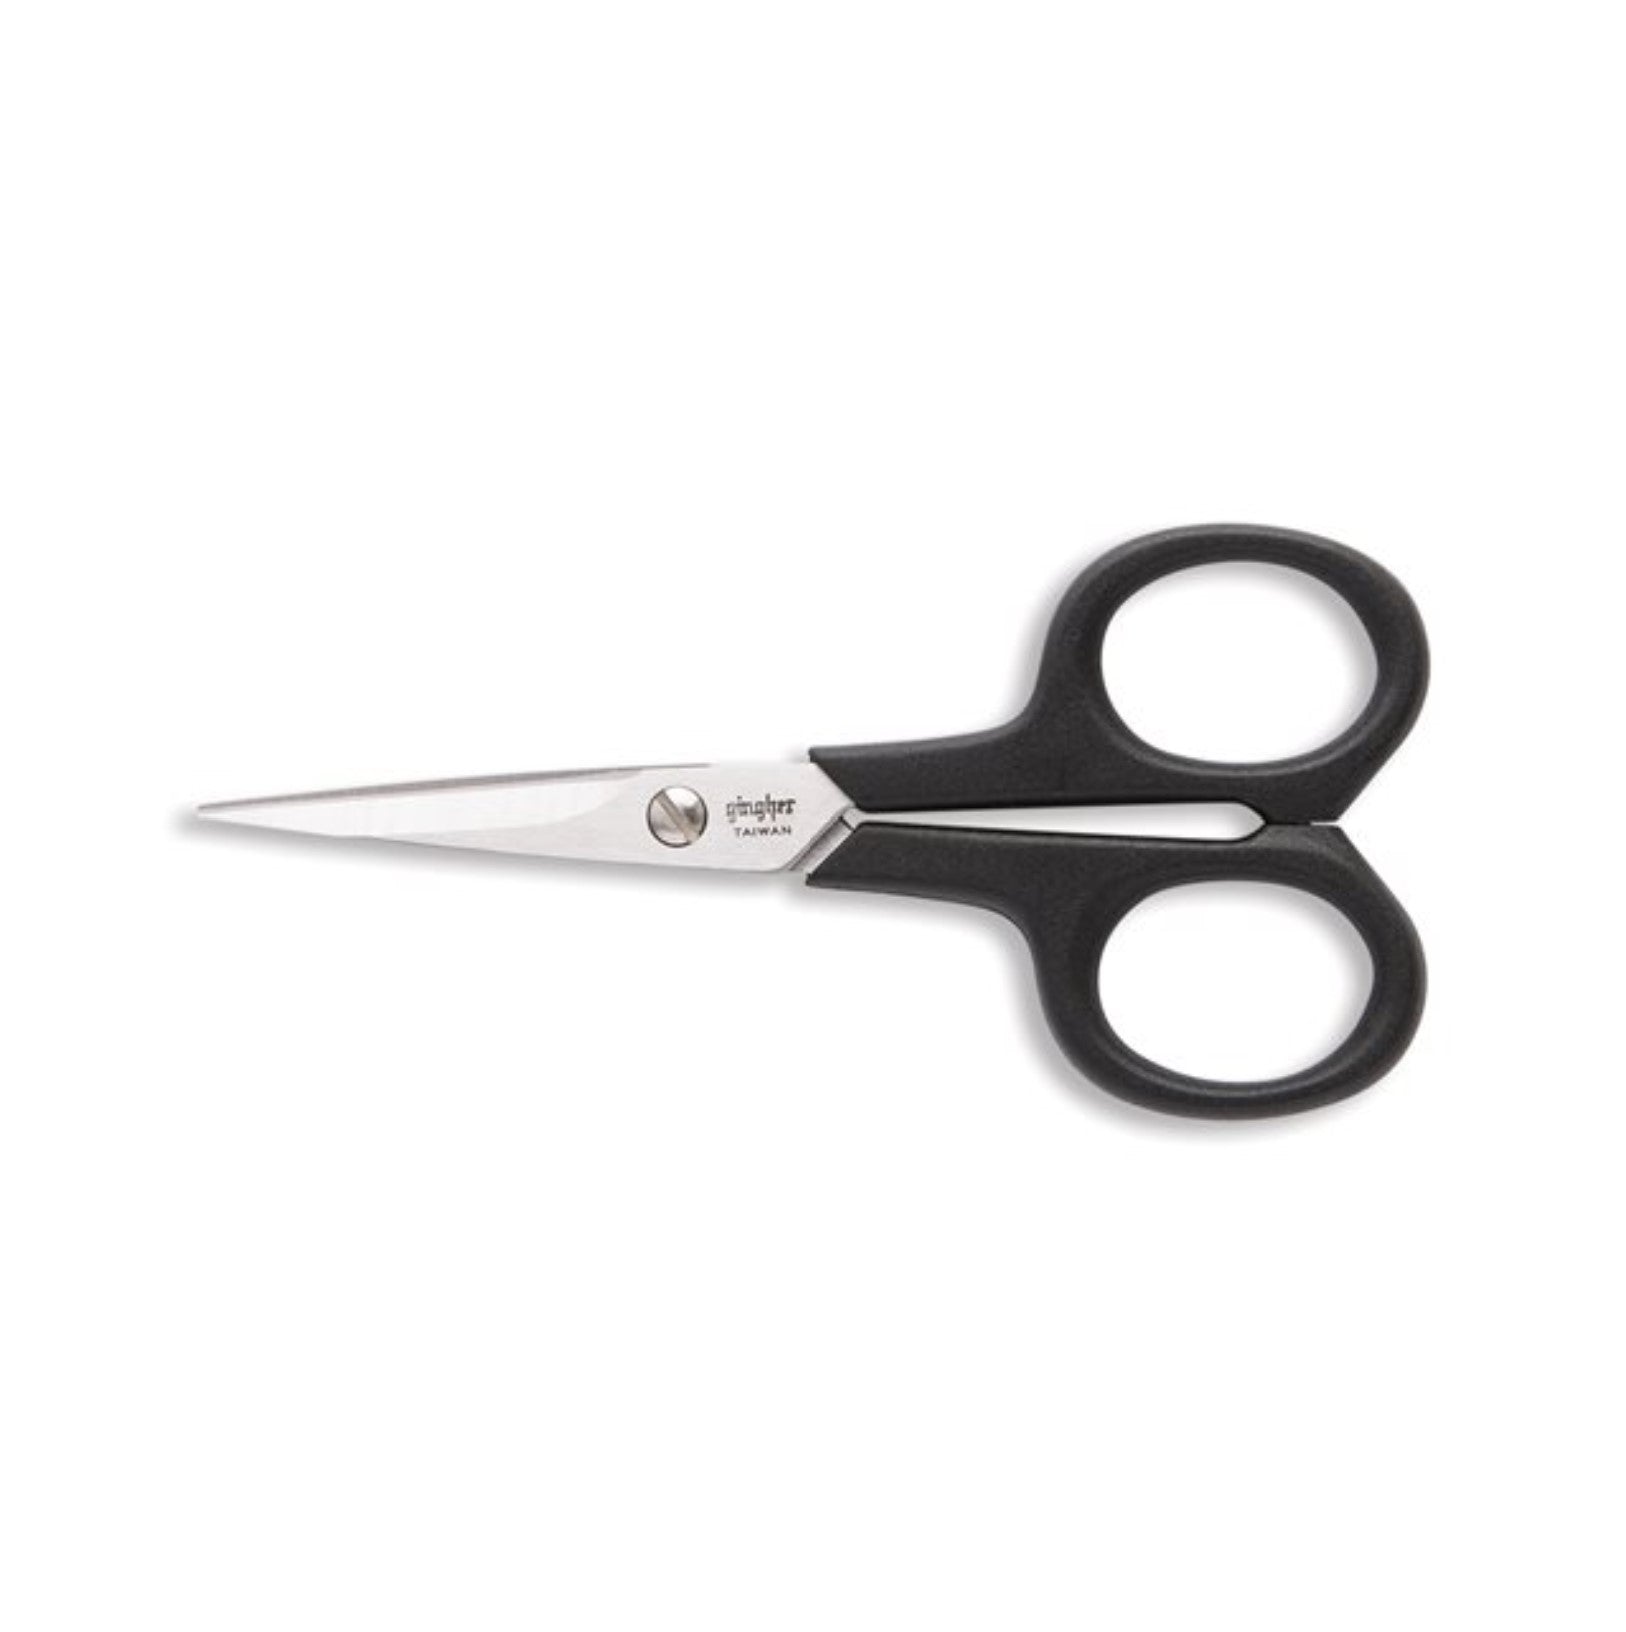 4" --- Light-weight Embroidery Scissors by Gingher®